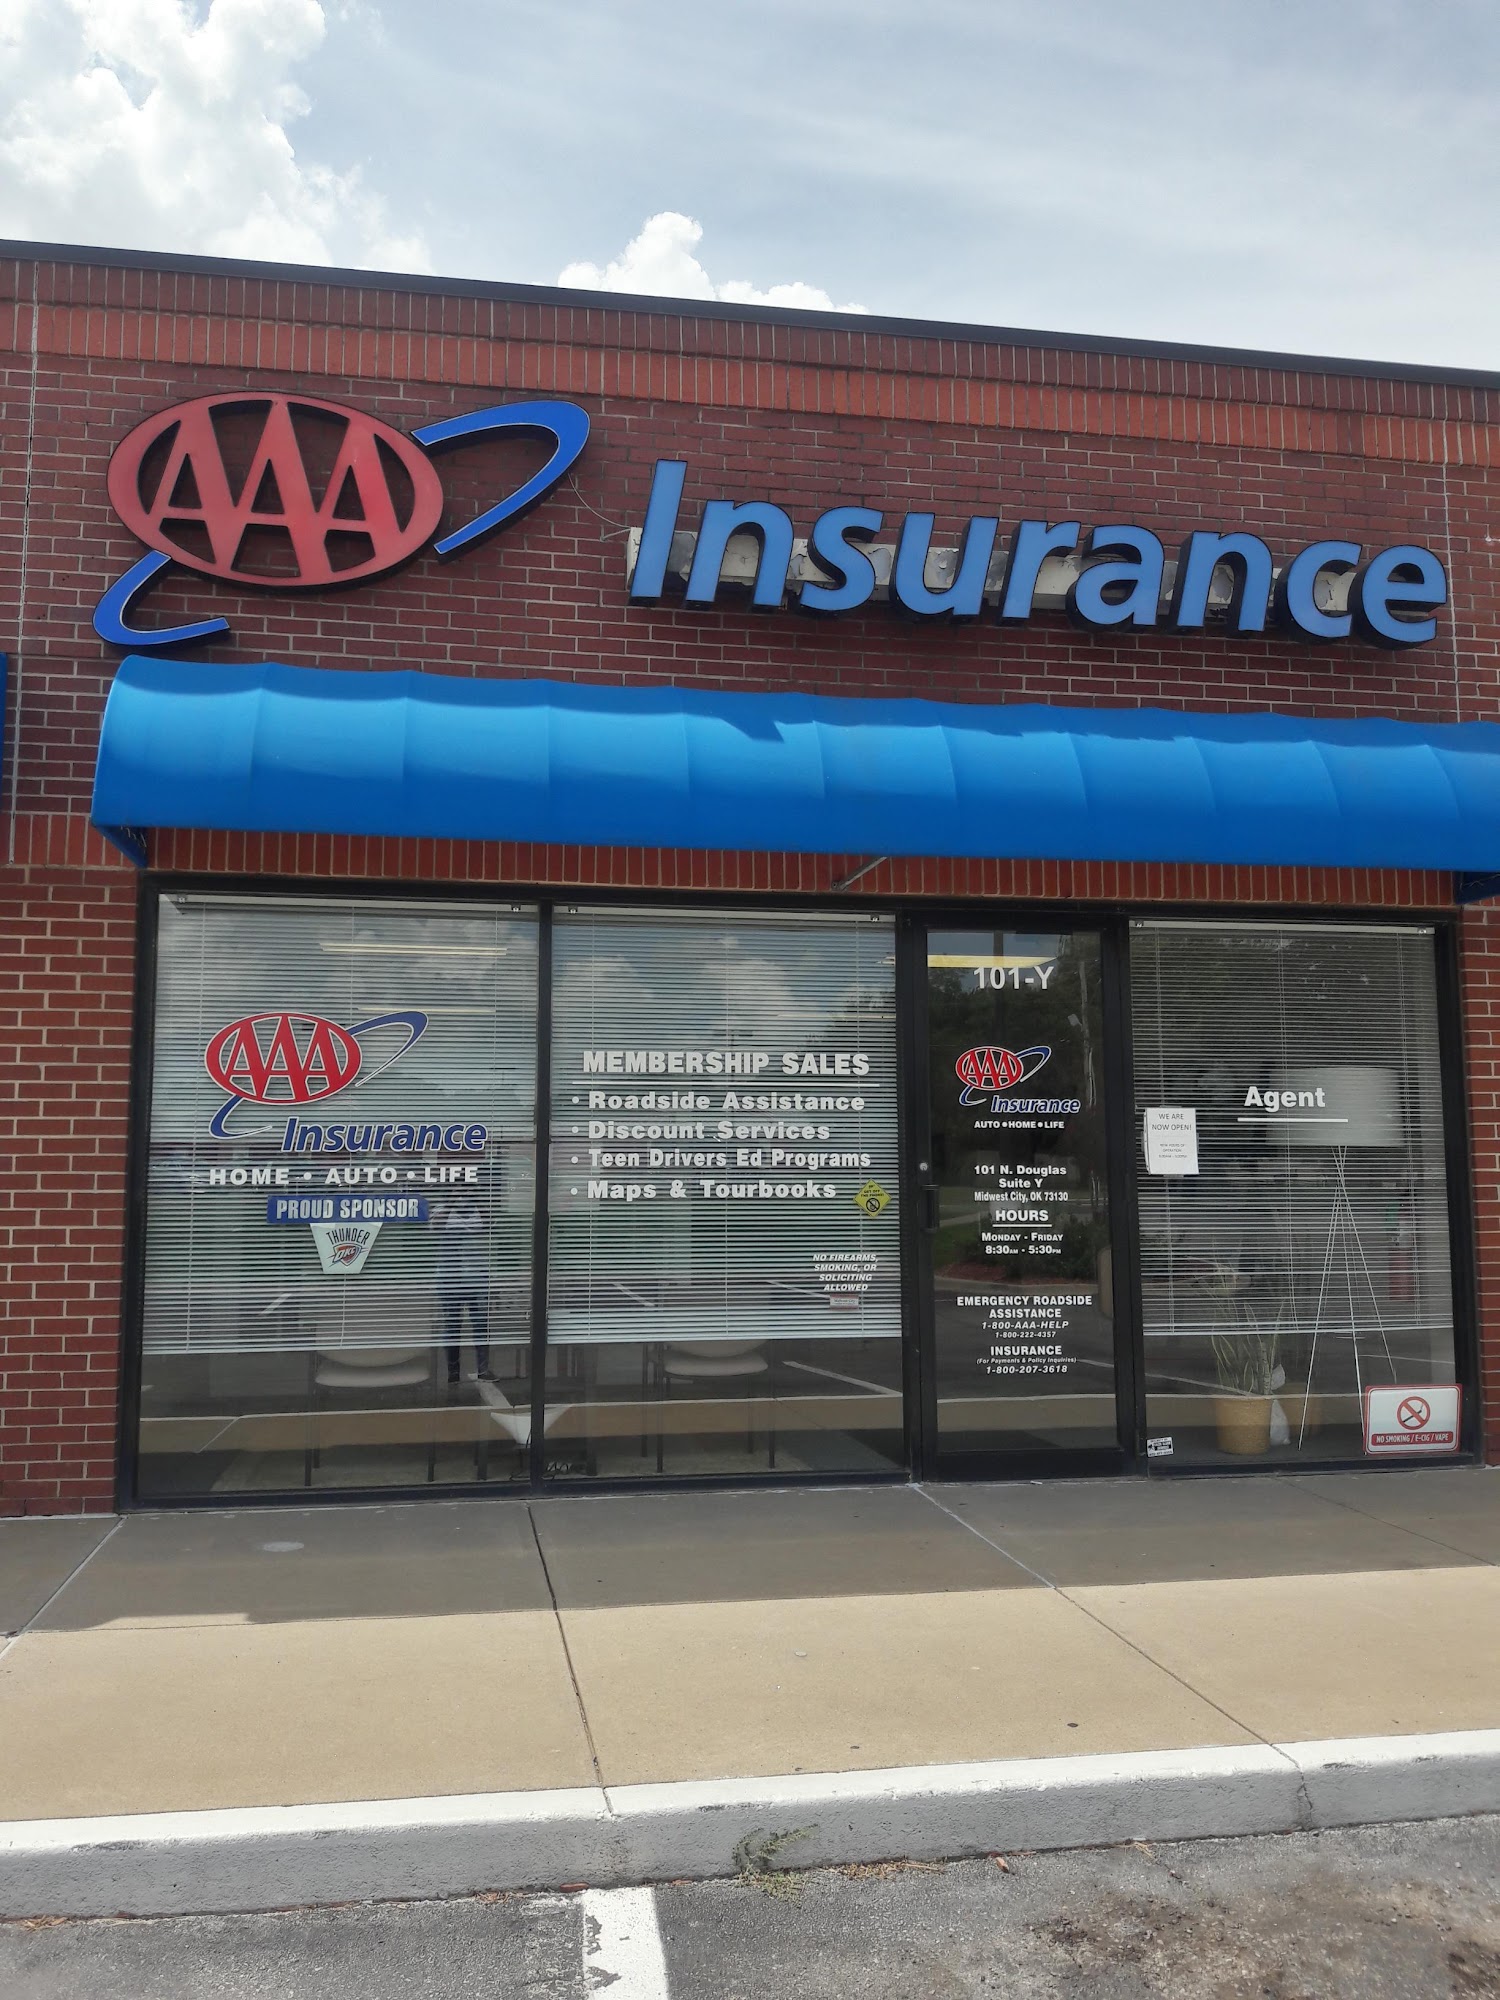 AAA Oklahoma - Midwest City - Insurance/Membership Only